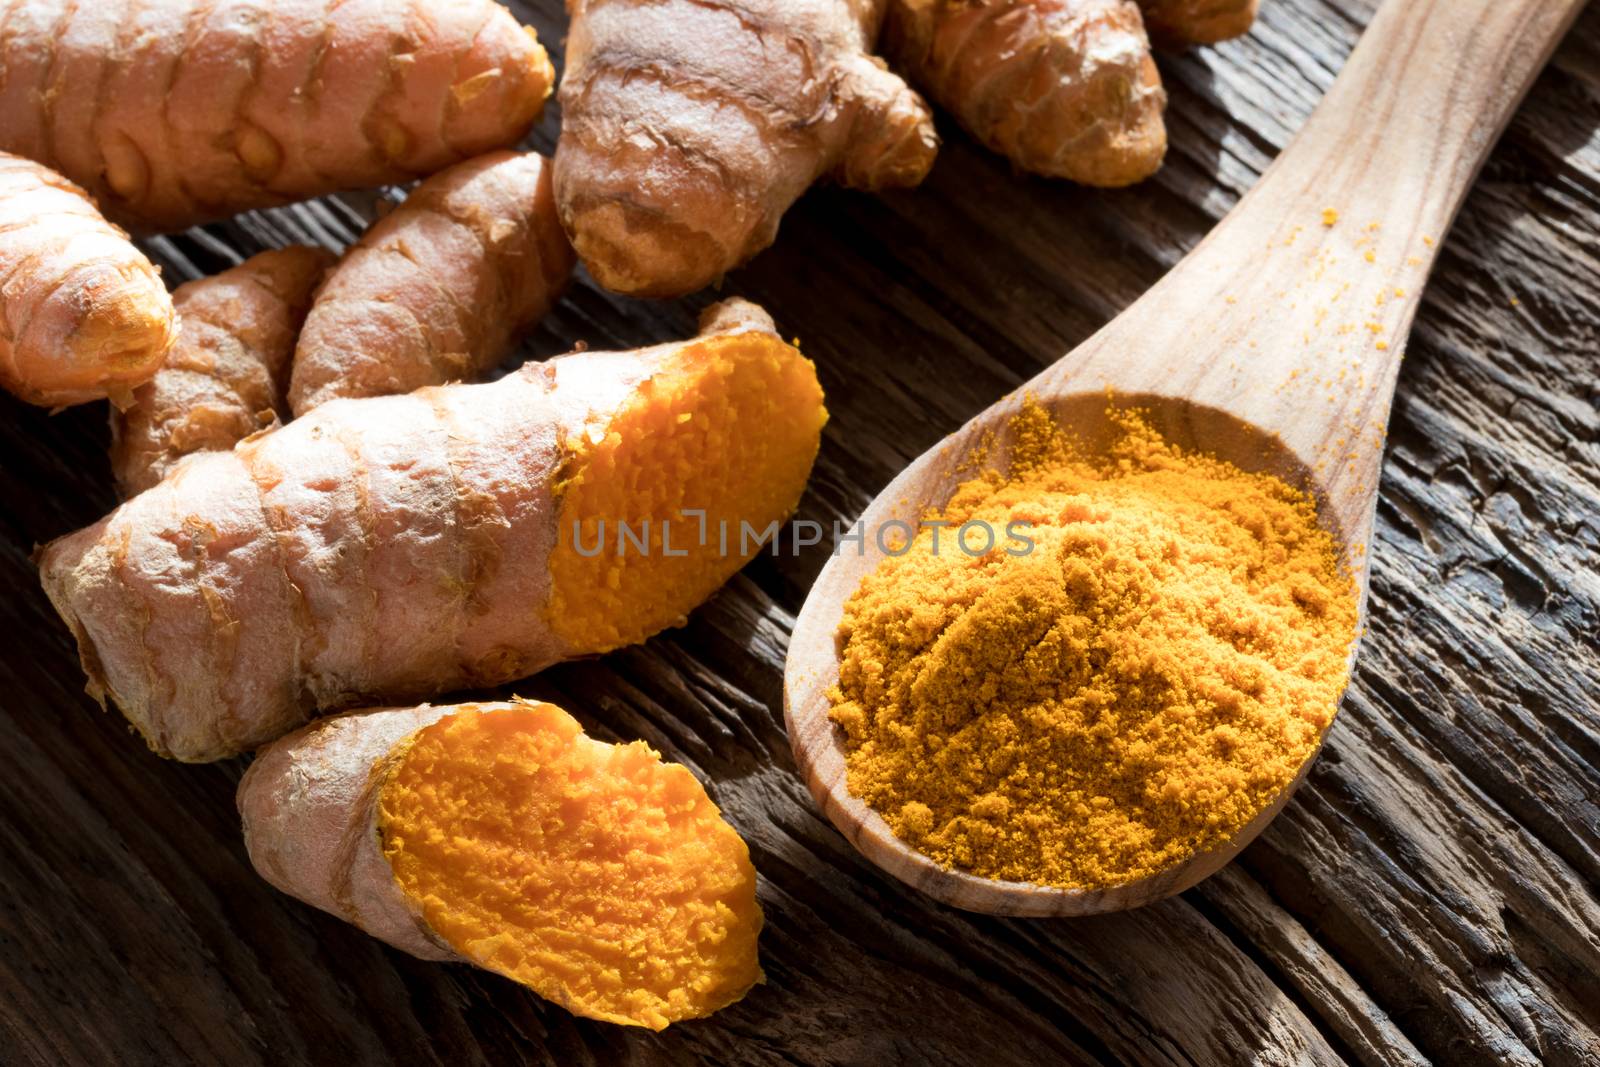 Ground turmeric on a wooden spoon, with fresh turmeric root in the background